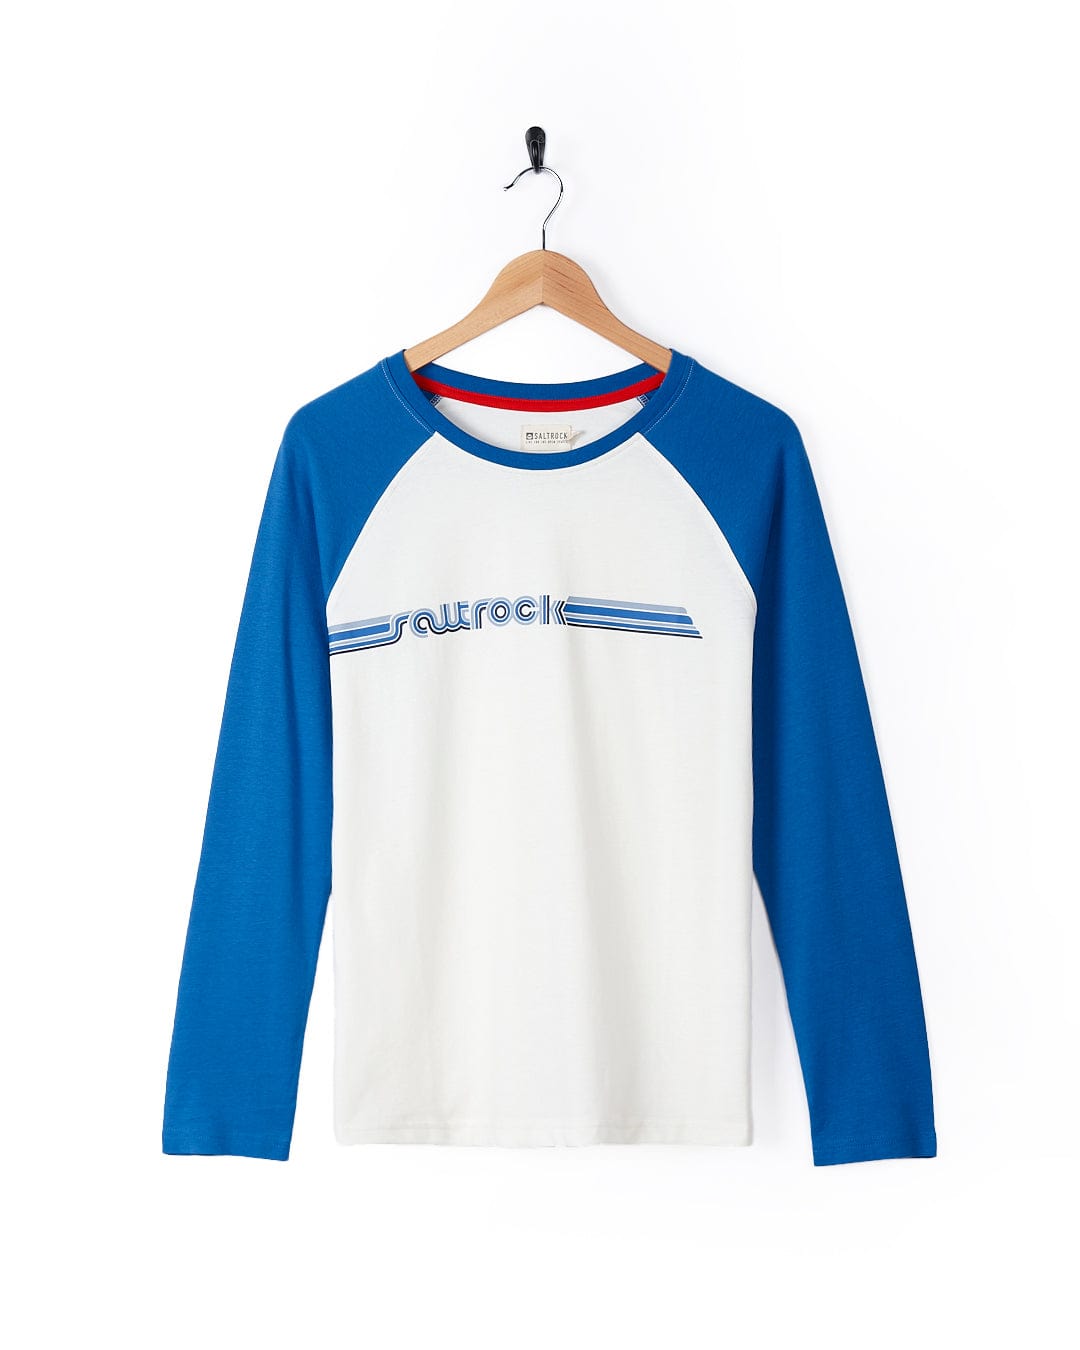 A Retro Ribbon - Womens Raglan Long Sleeve T-Shirt - White made of cotton, featuring the word "surf" on it.